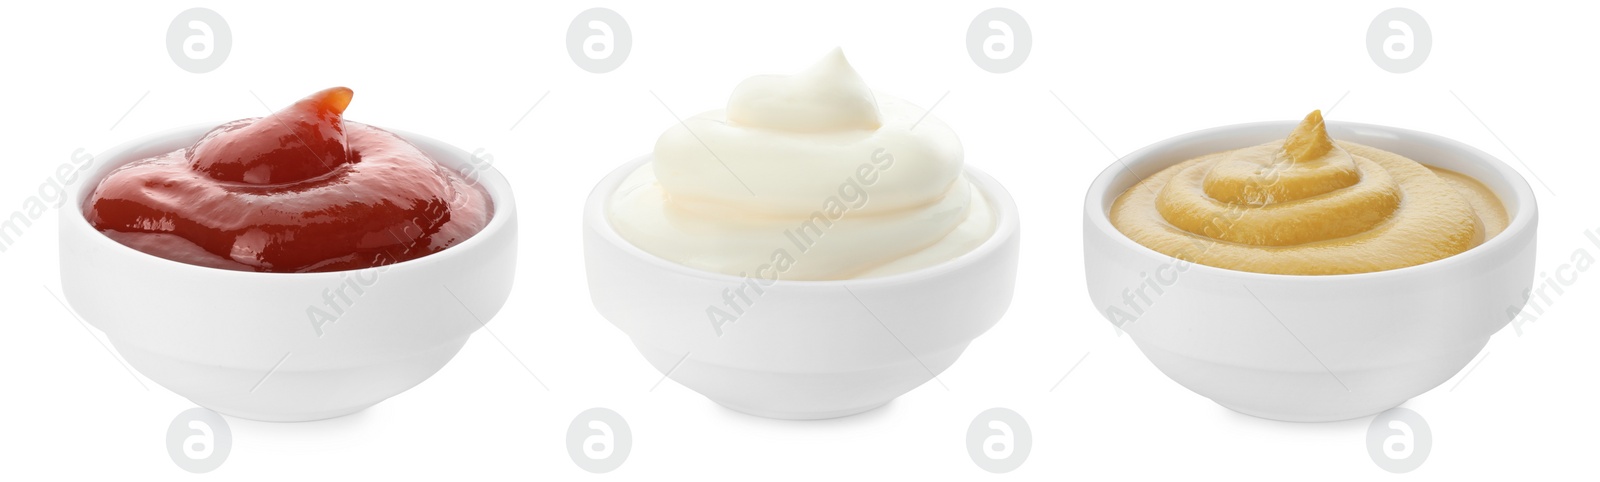 Image of Different sauces in bowls isolated on white, set